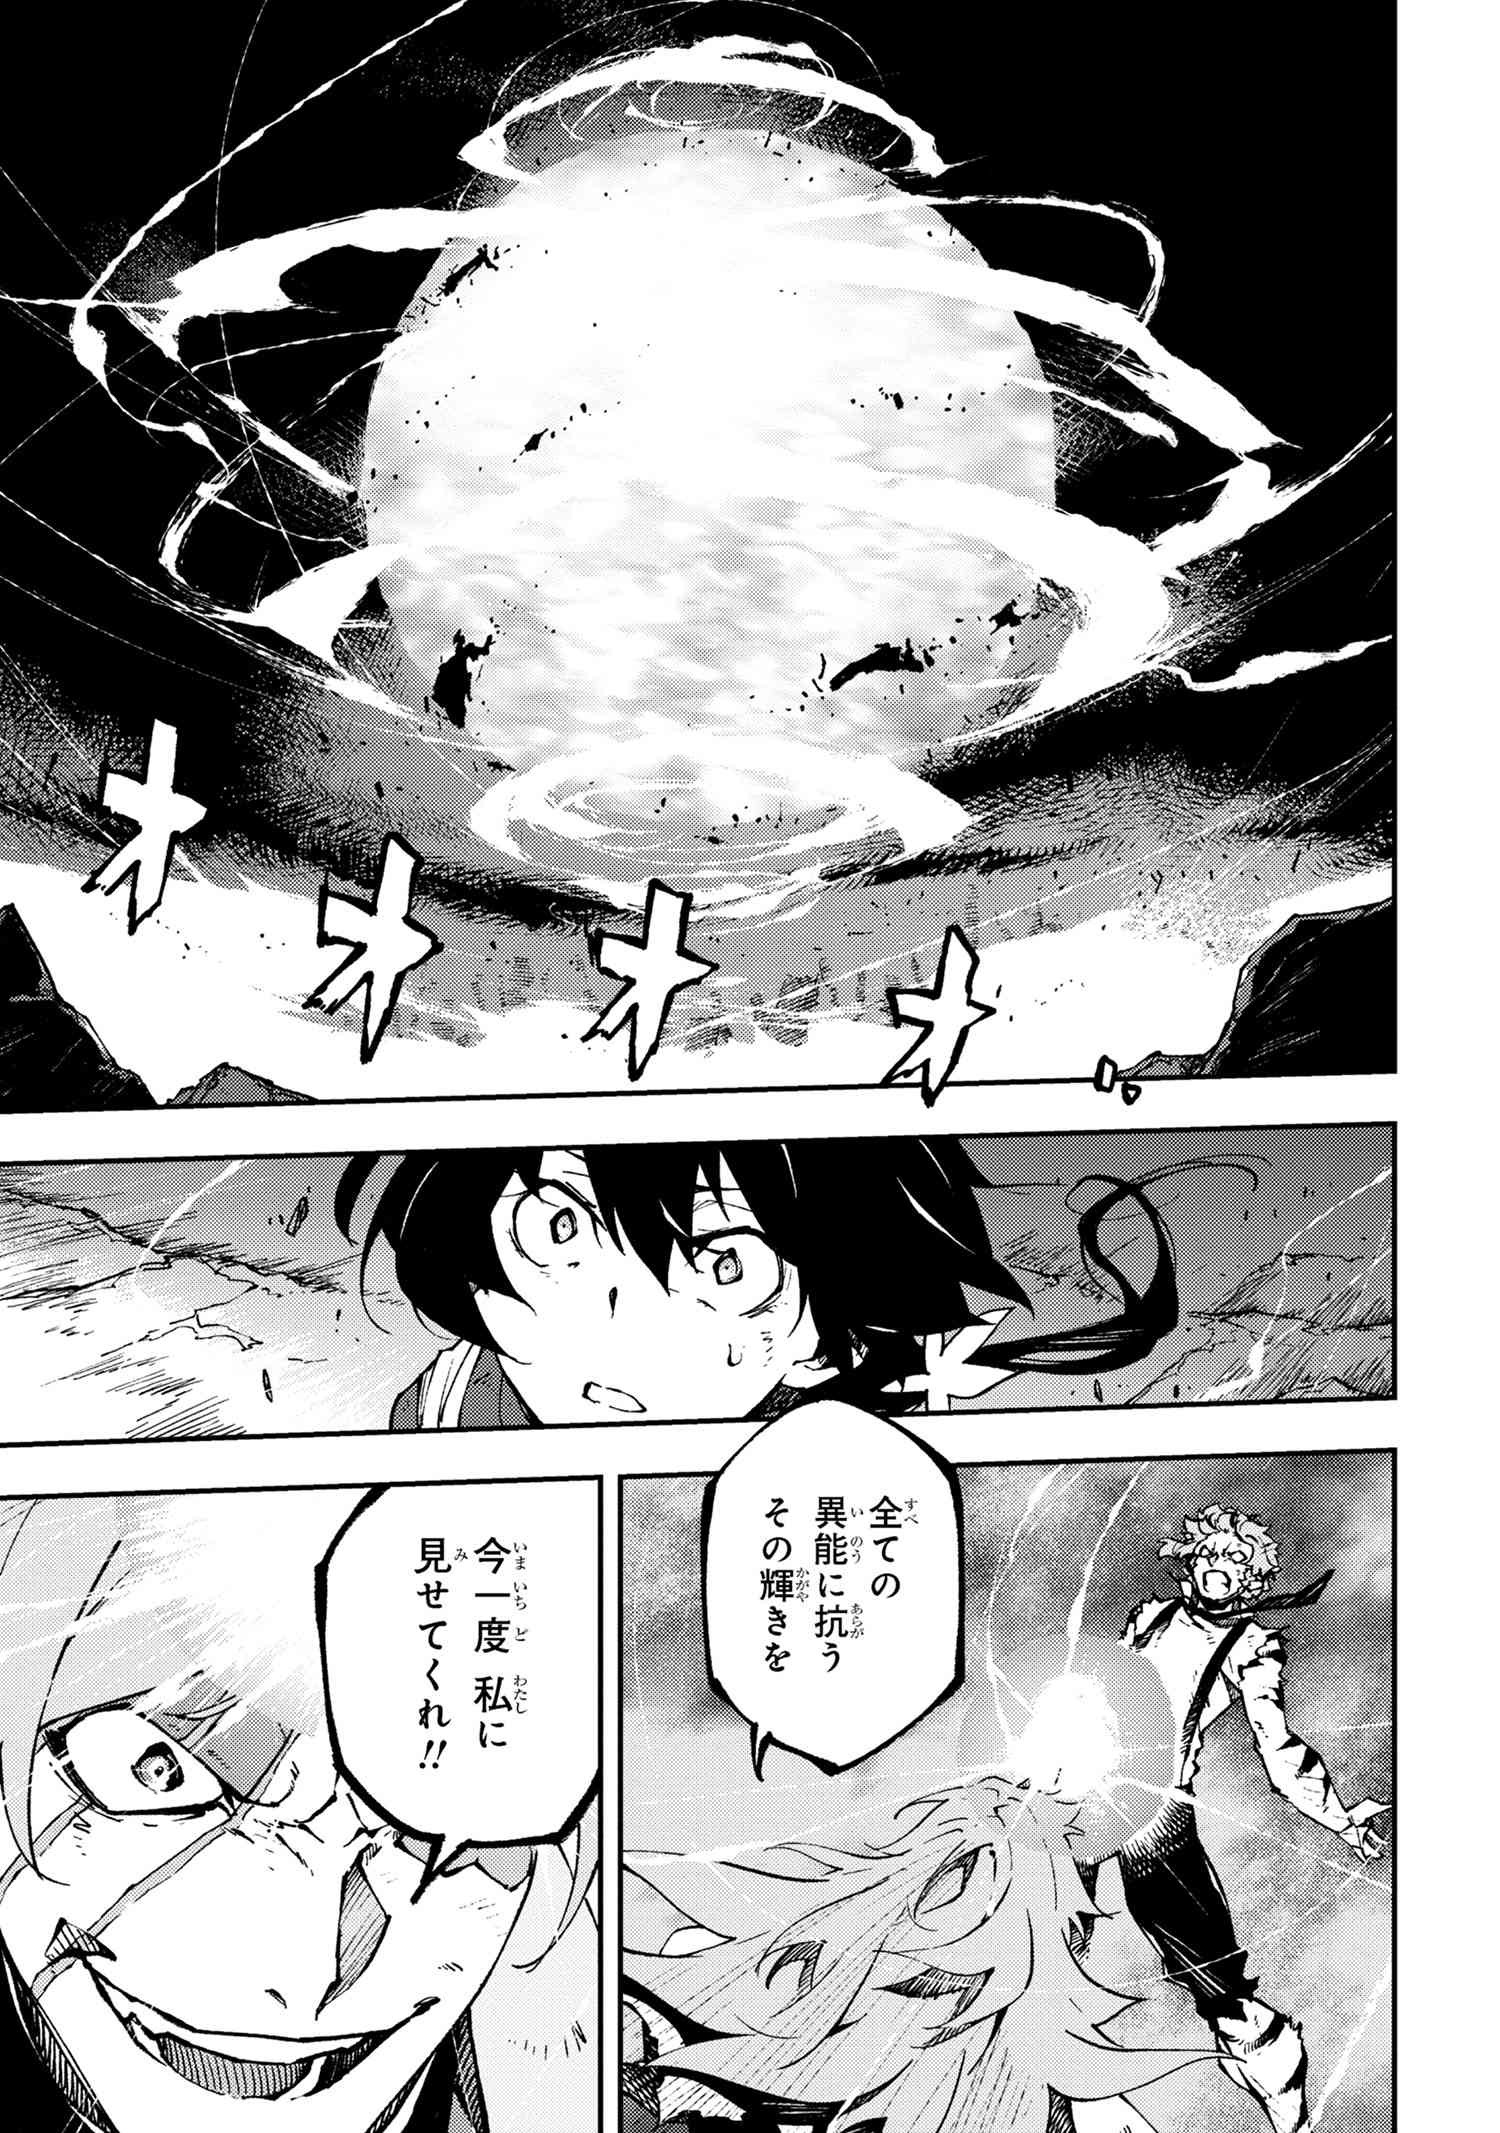 Bungou Stray Dogs: Dead Apple - Chapter 15-4 - Page 2